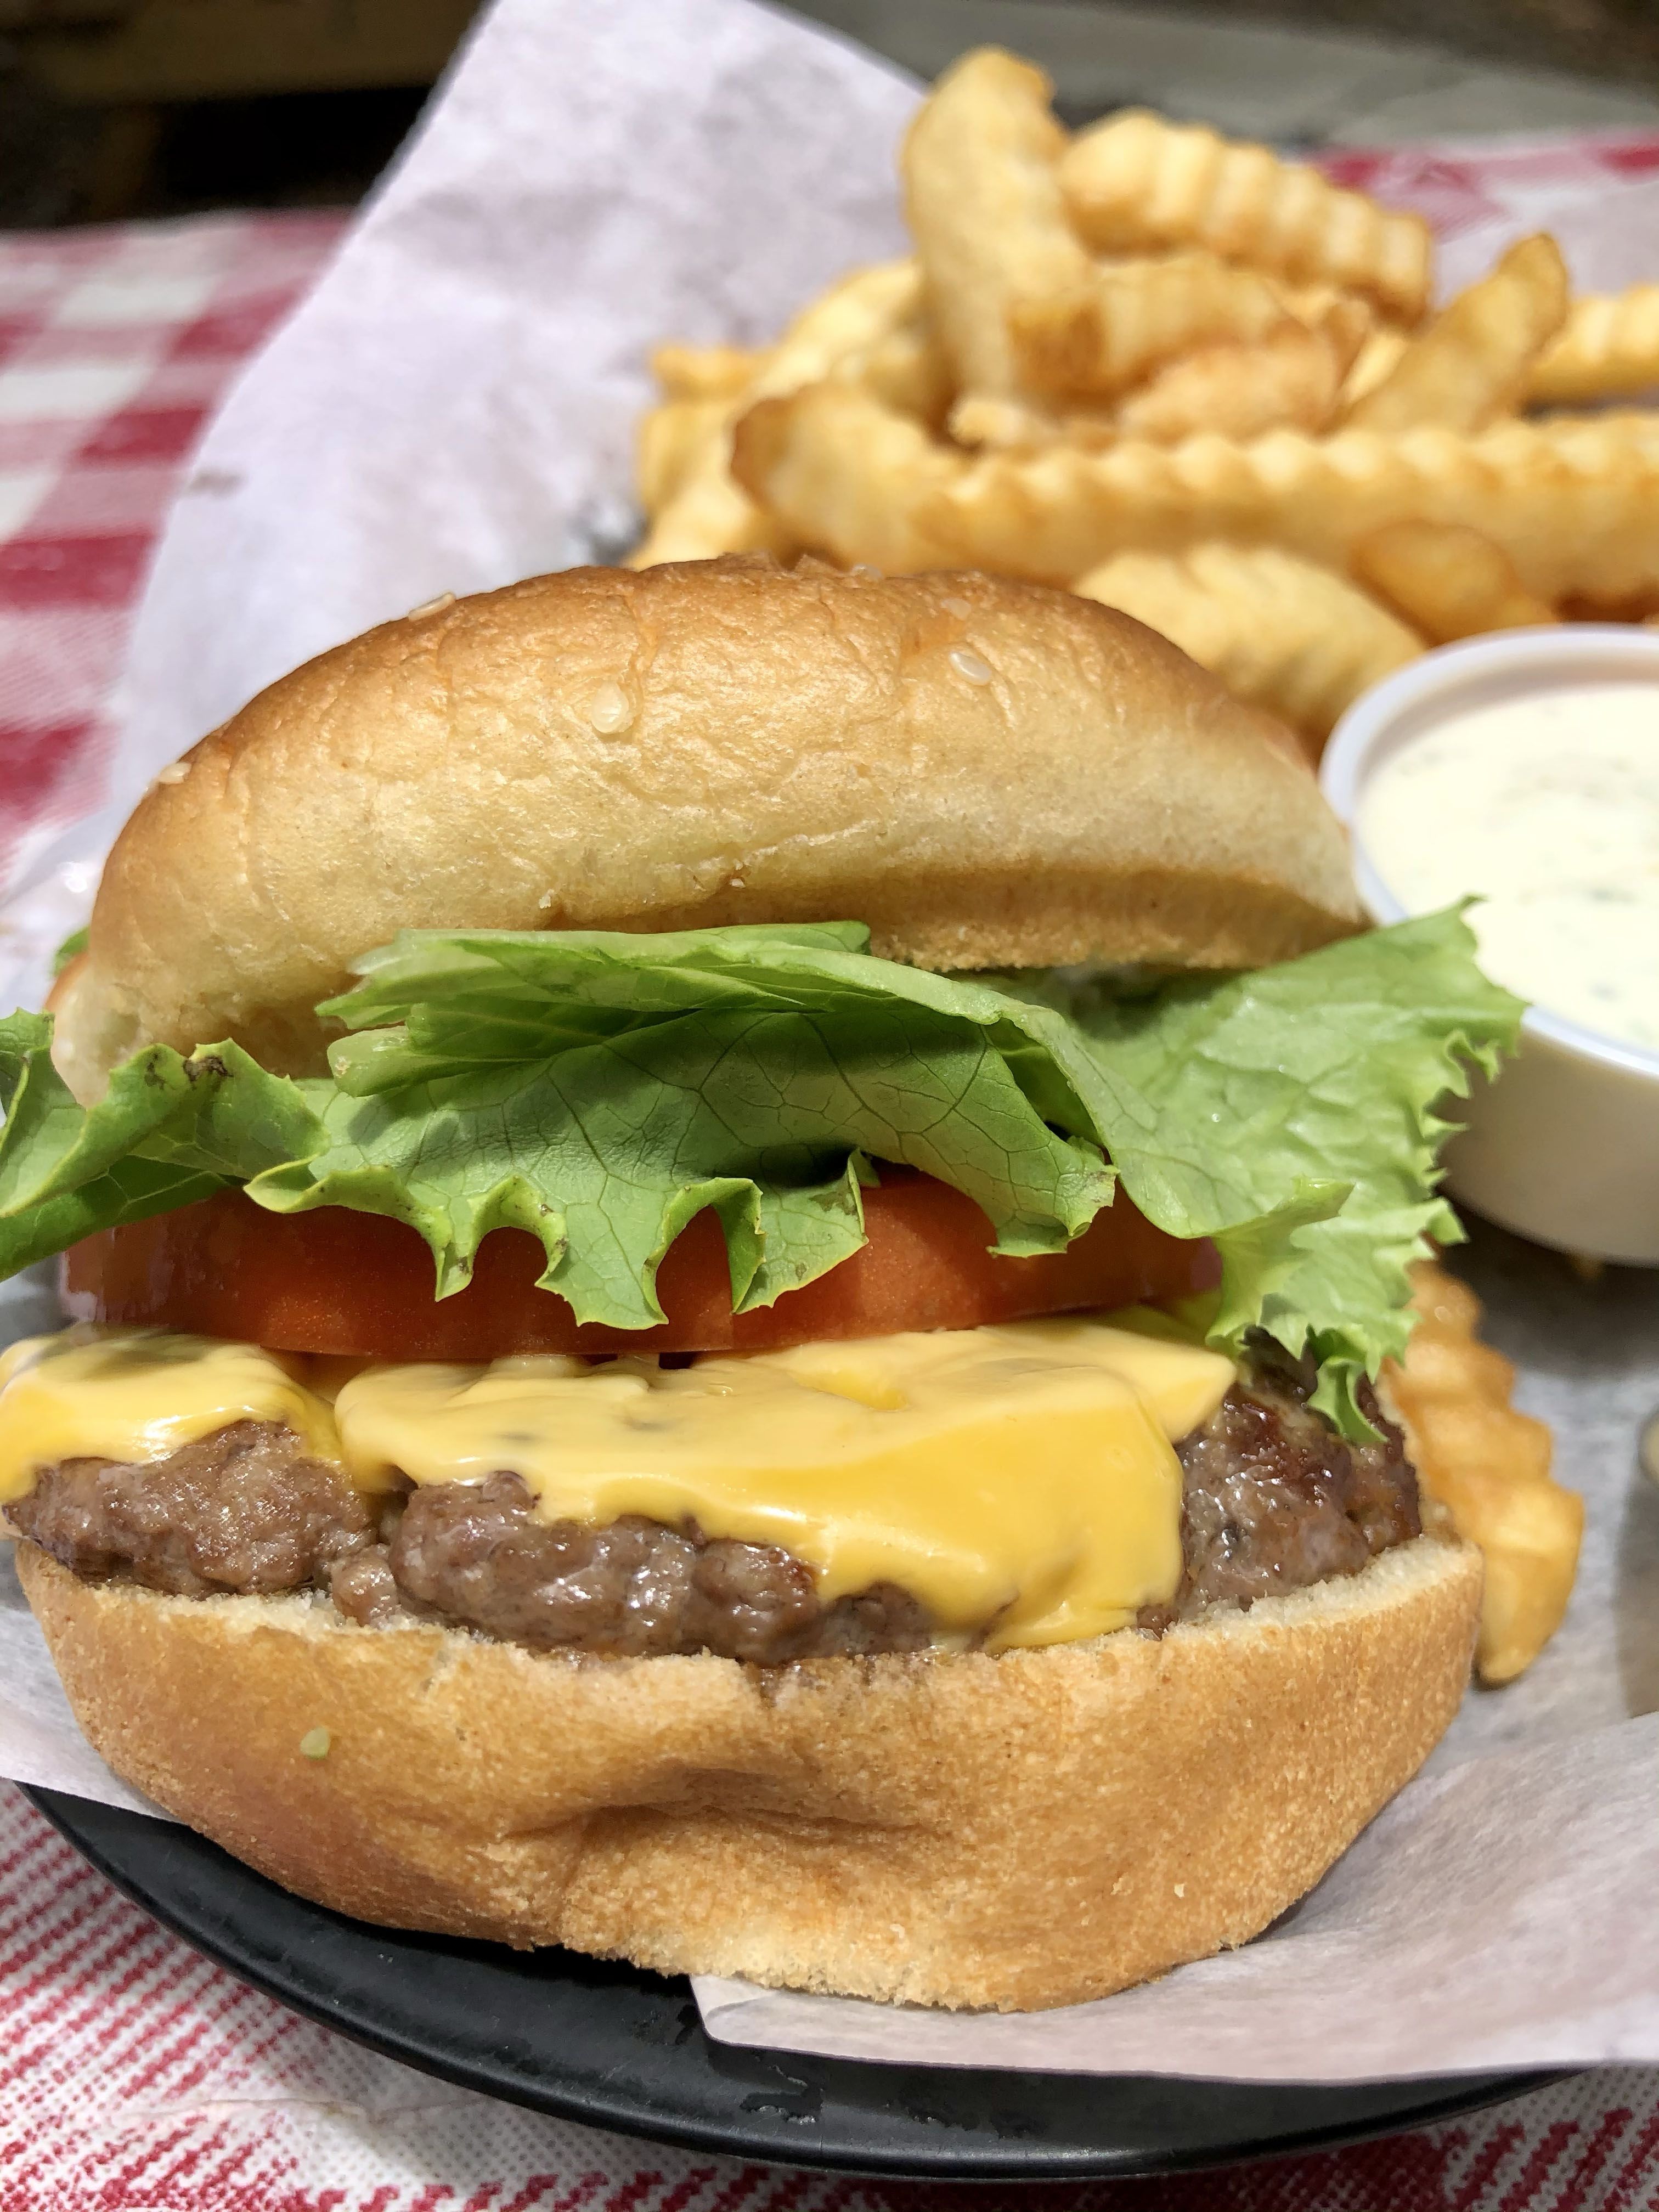 a cheeseburger and crinkle fries from the original saline